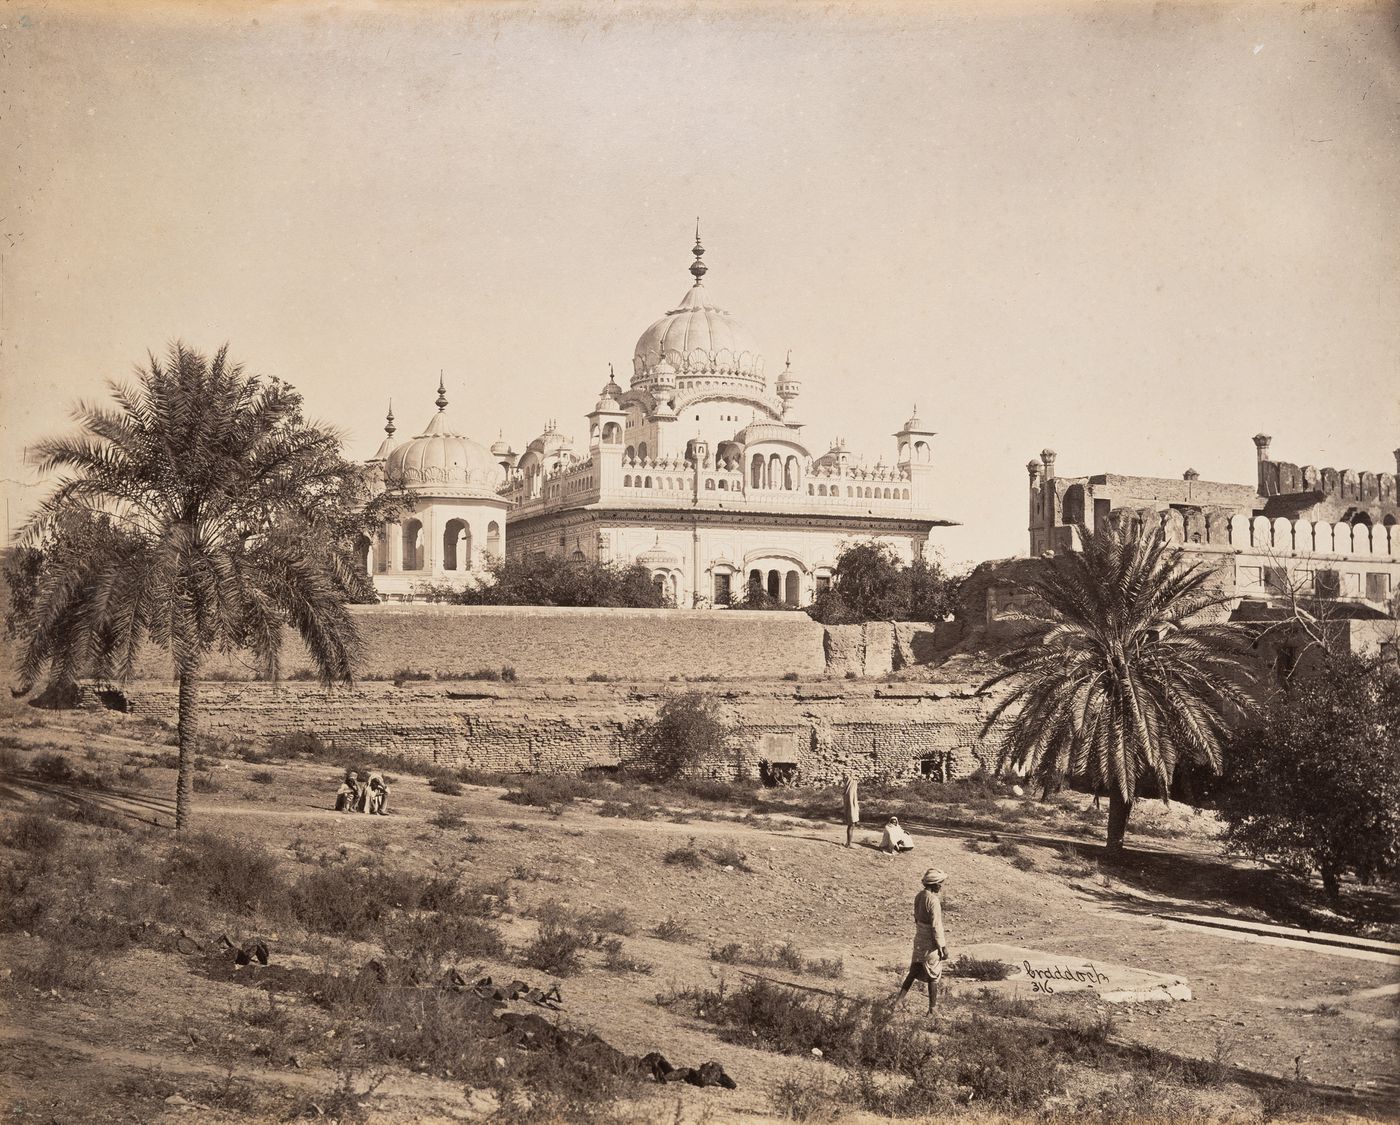 View of the Mausoleum of Maharaja Ranjit Singh, Lahore, India (now in Pakistan)